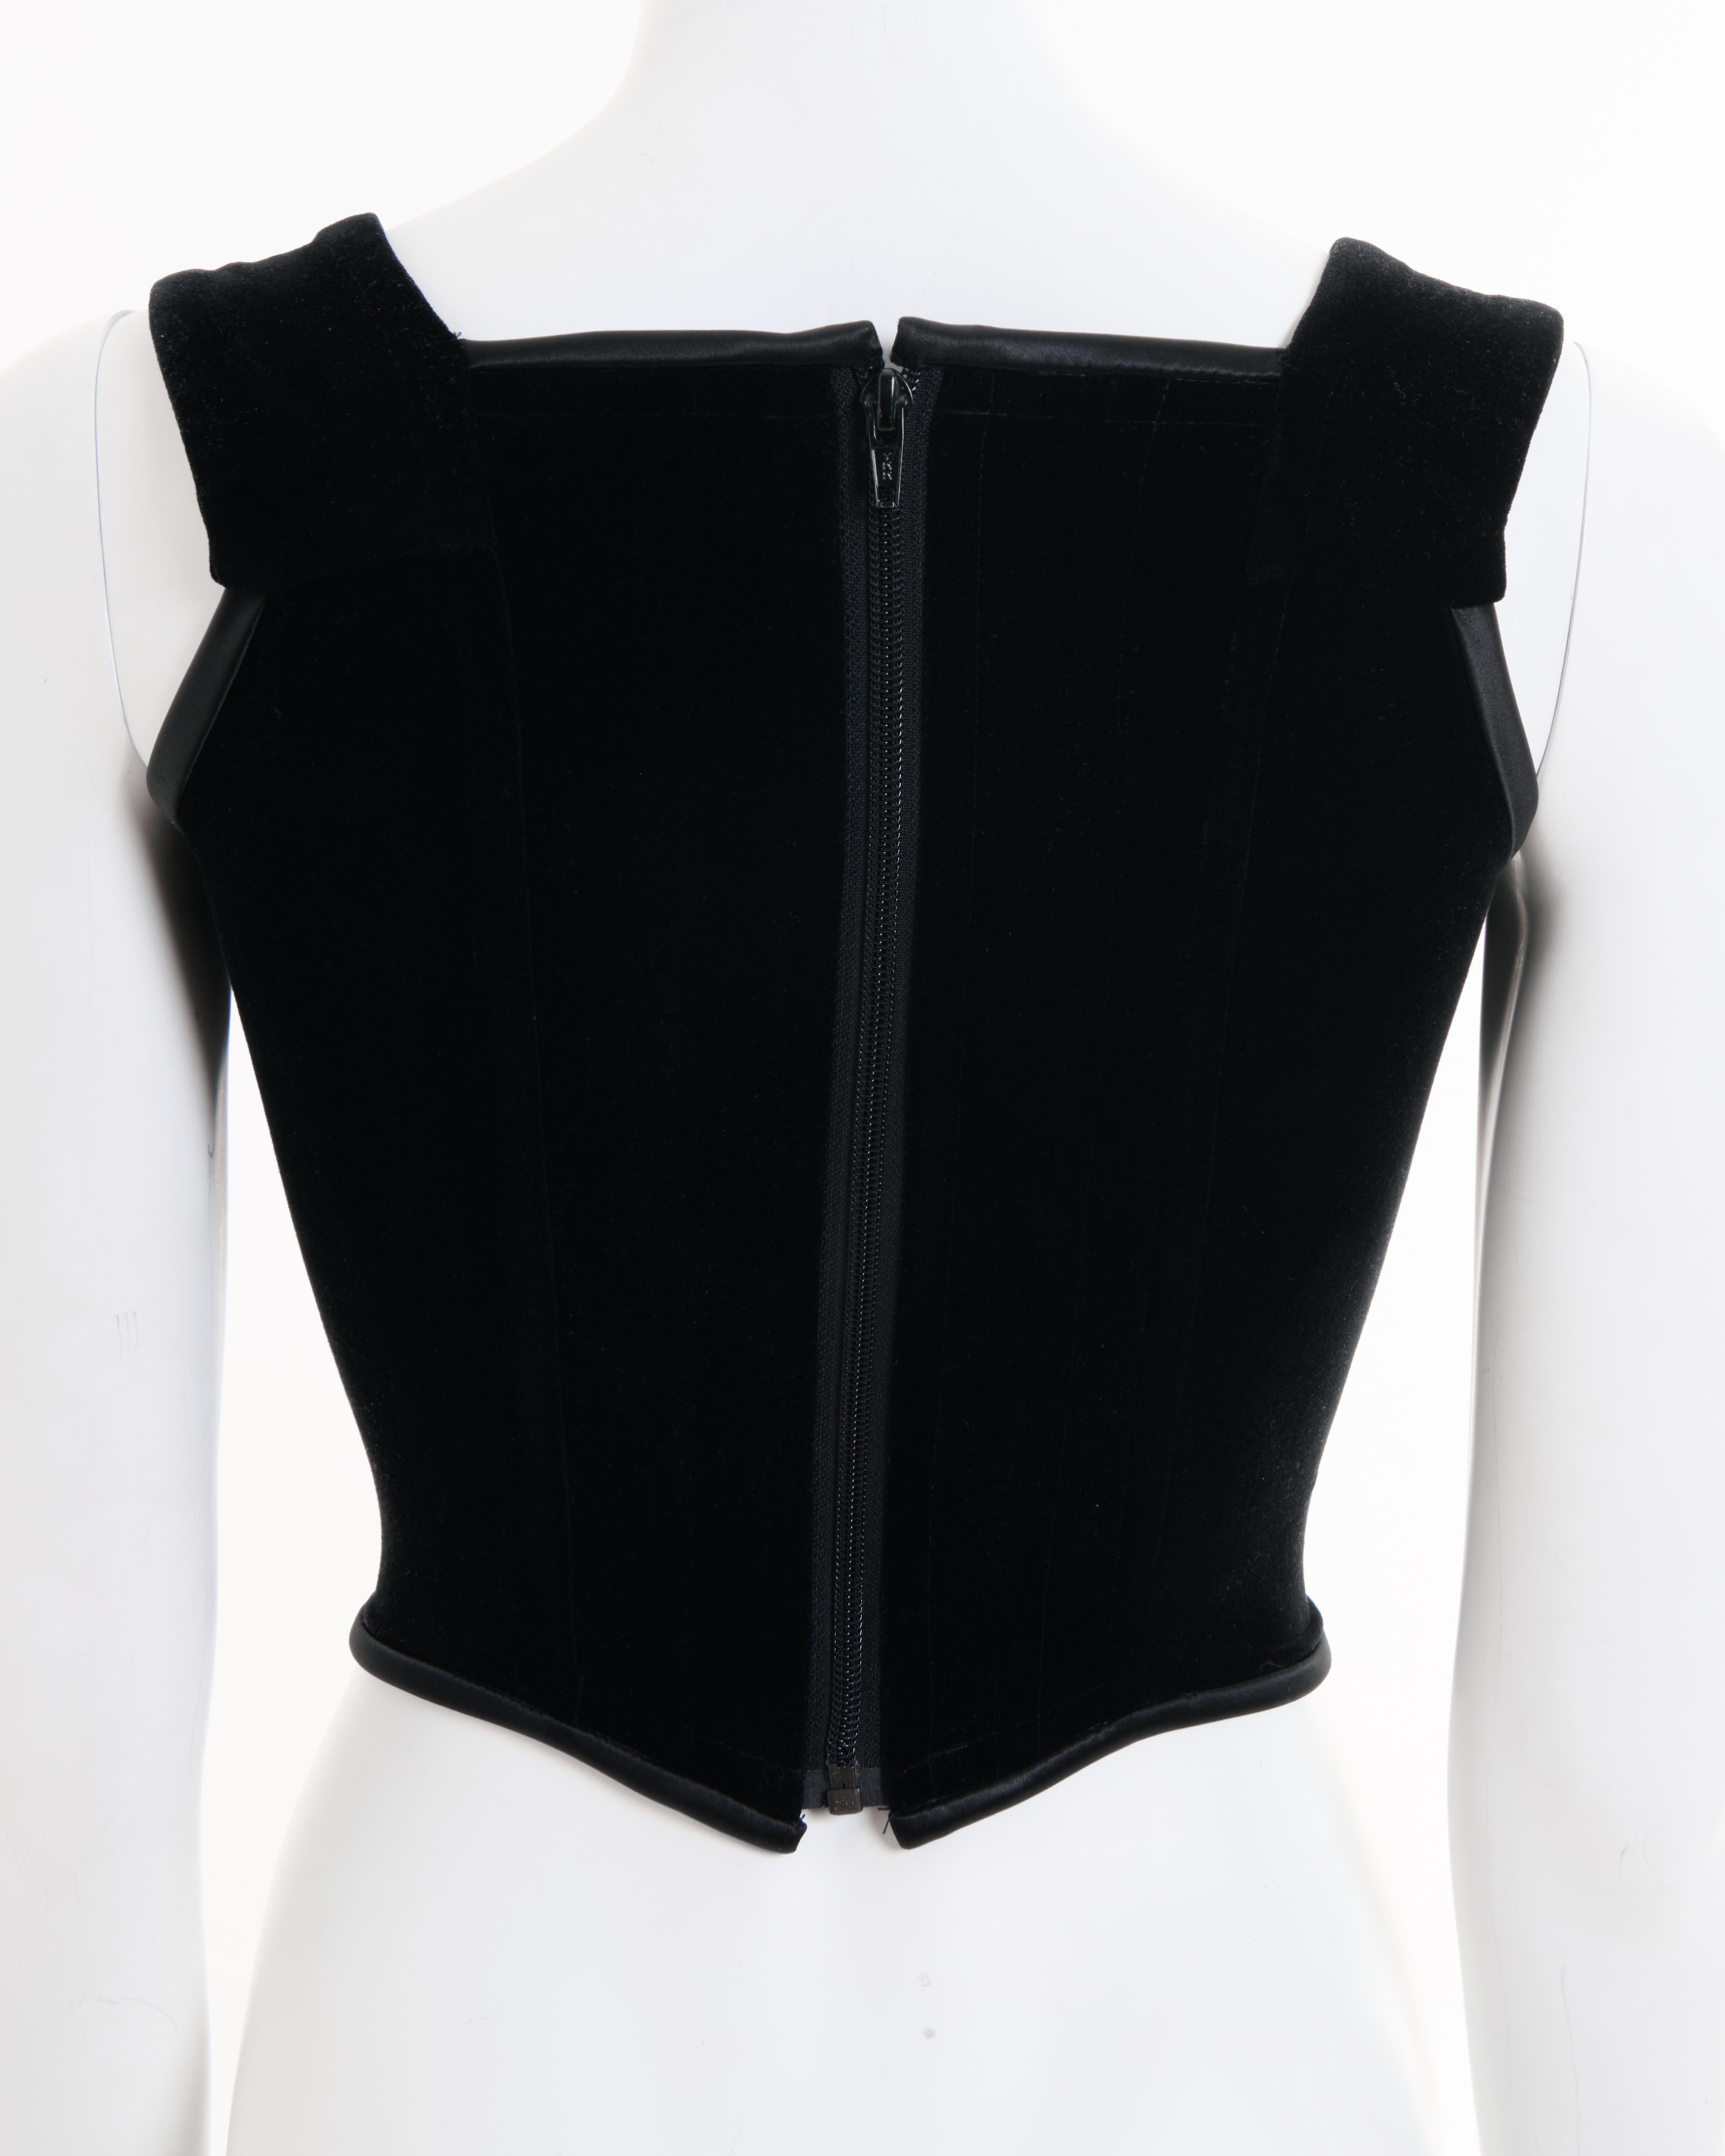 Vivienne Westwood F/W 1996 Couture Black velvet and satin bow corset  For Sale 3